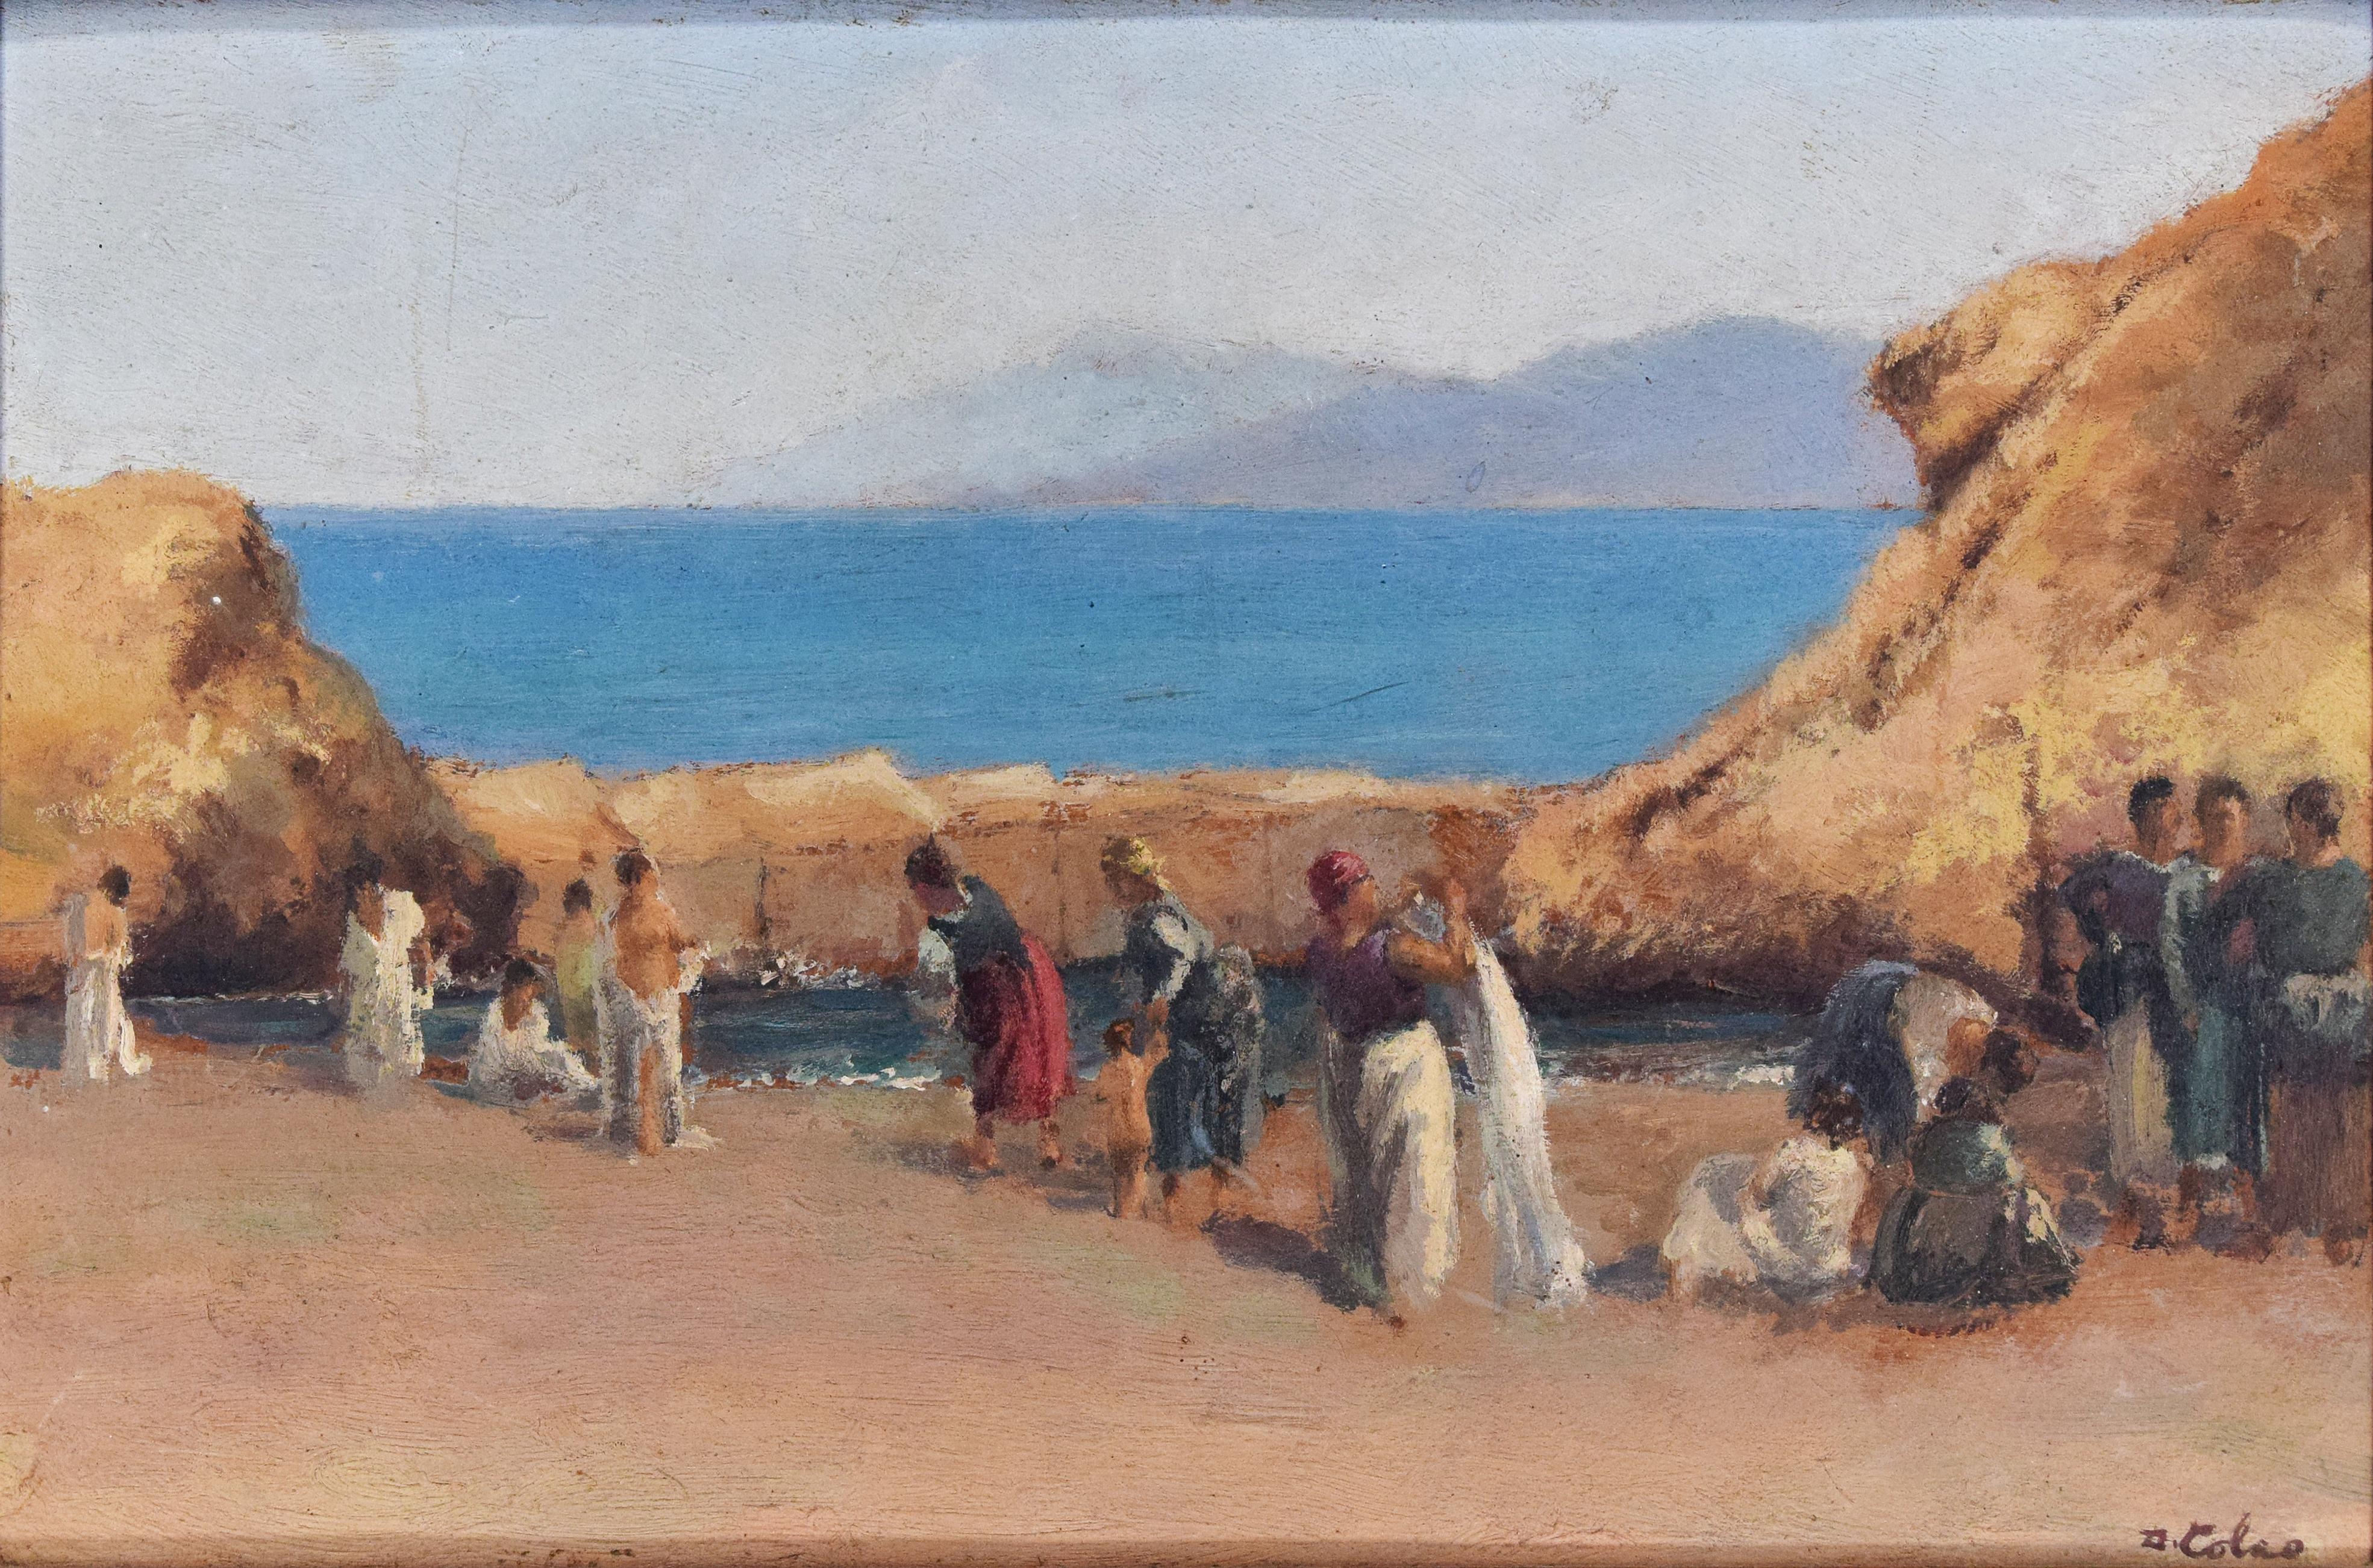 Women on the Beach - Oil Painting by Domenico Colao-Early 20th century